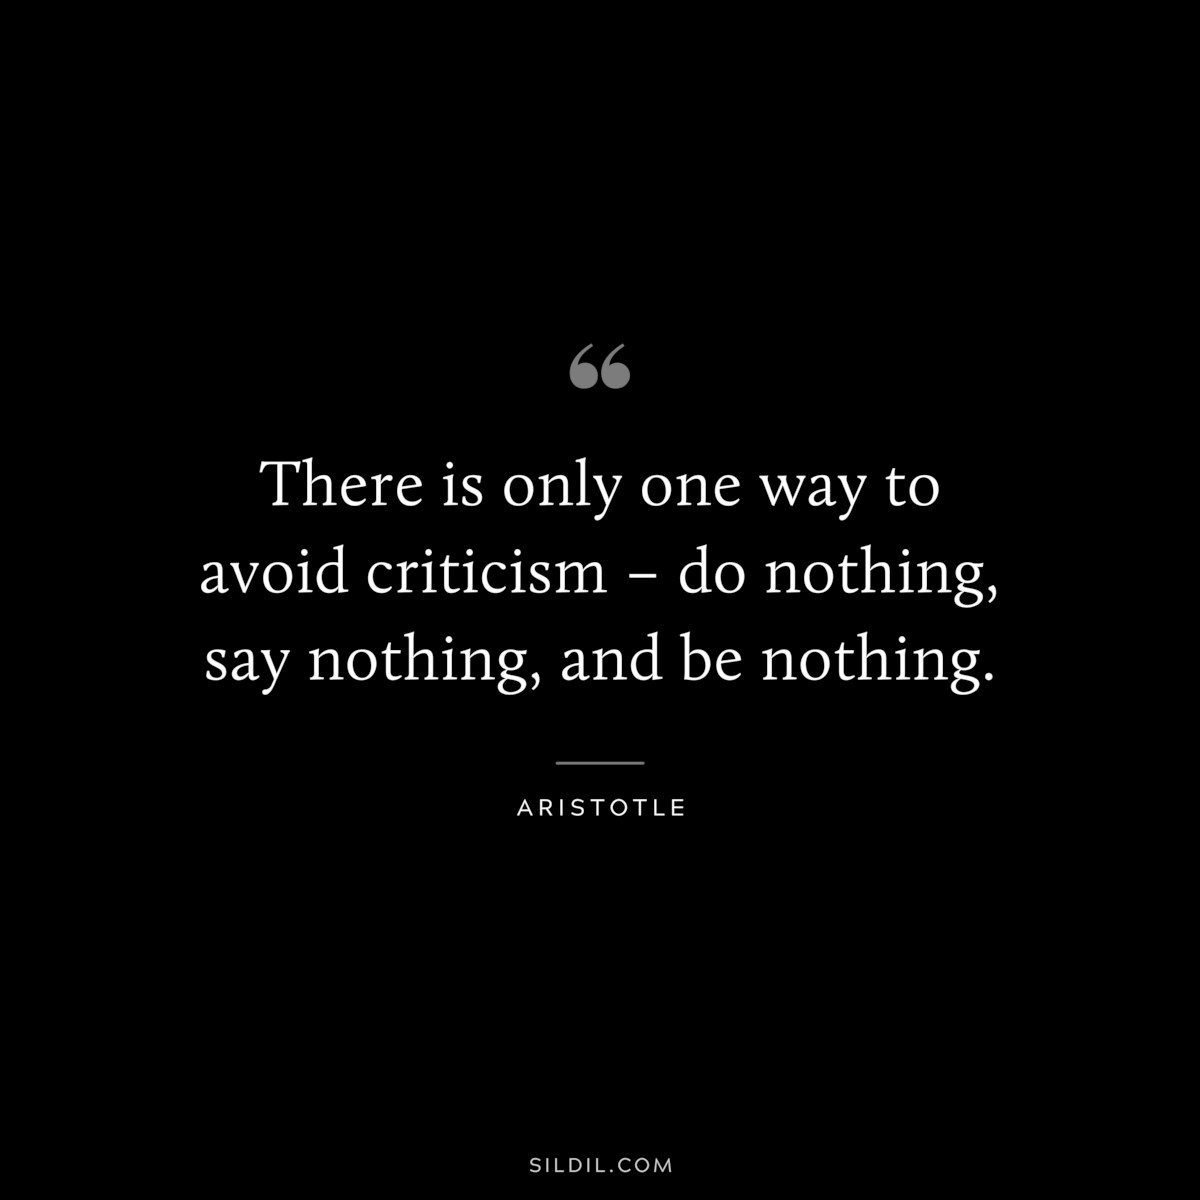 There is only one way to avoid criticism – do nothing, say nothing, and be nothing. ― Aristotle